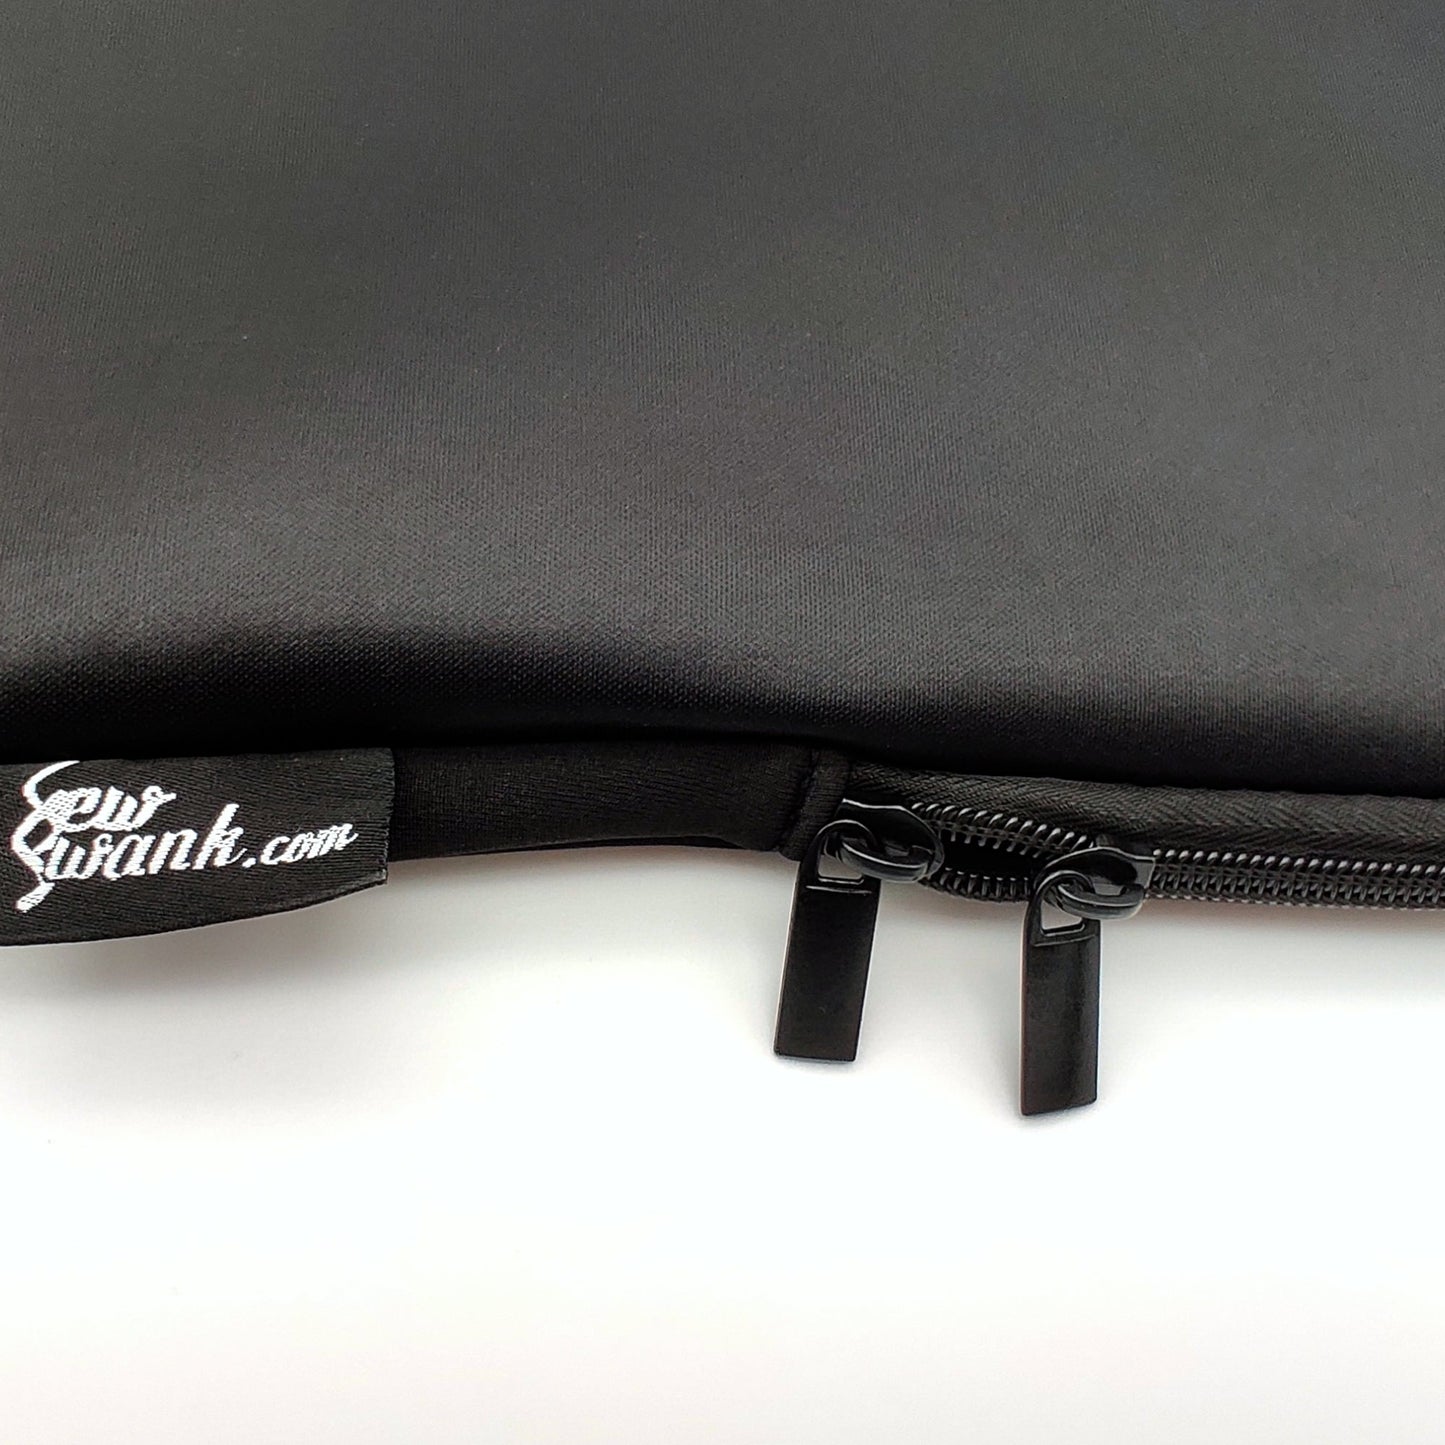 13-15 Inch Solid Black Laptop Sleeve